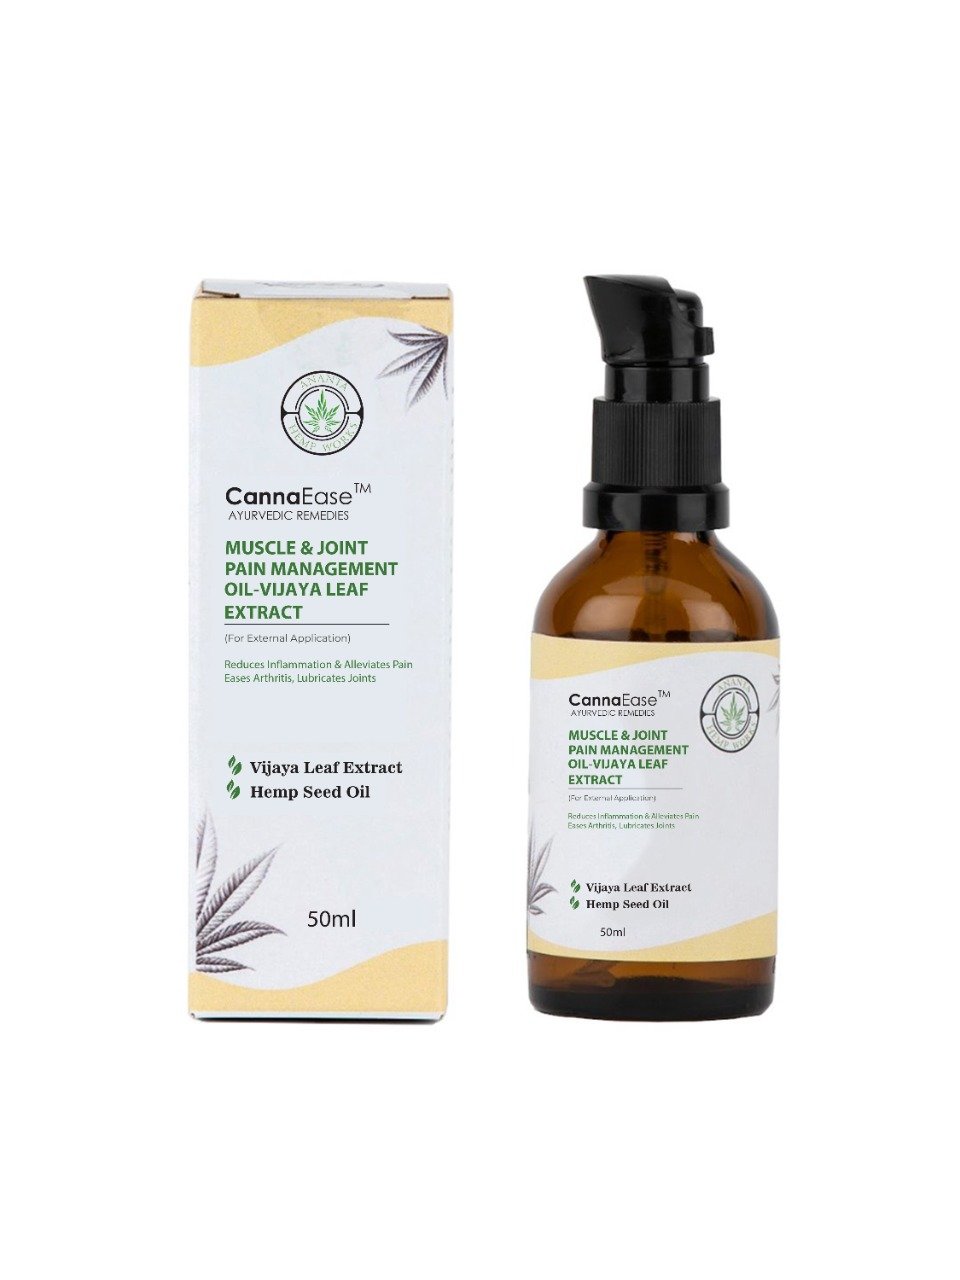 CANNAEASE™ MUSCLE & JOINT PAIN MANAGEMENT OIL - VIJAYA LEAF EXTRACT (FOR EXTERNAL APPLICATION) 50 ML